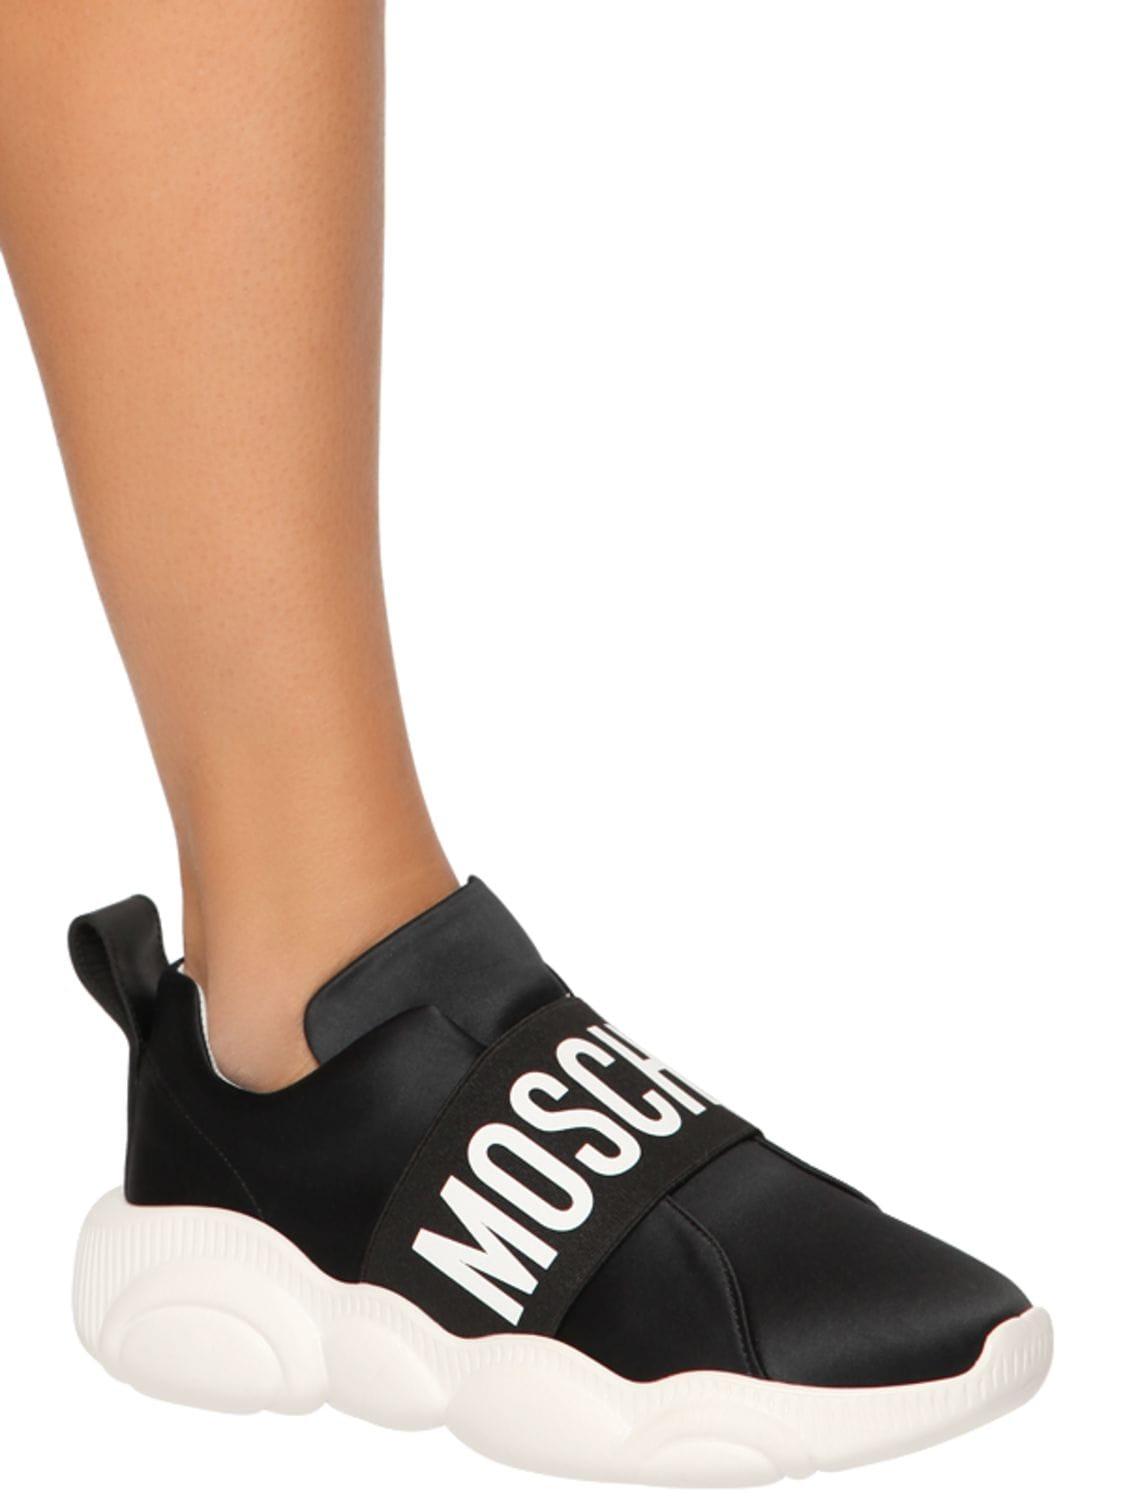 Moschino Logo Slip On Trainers in Black | Lyst